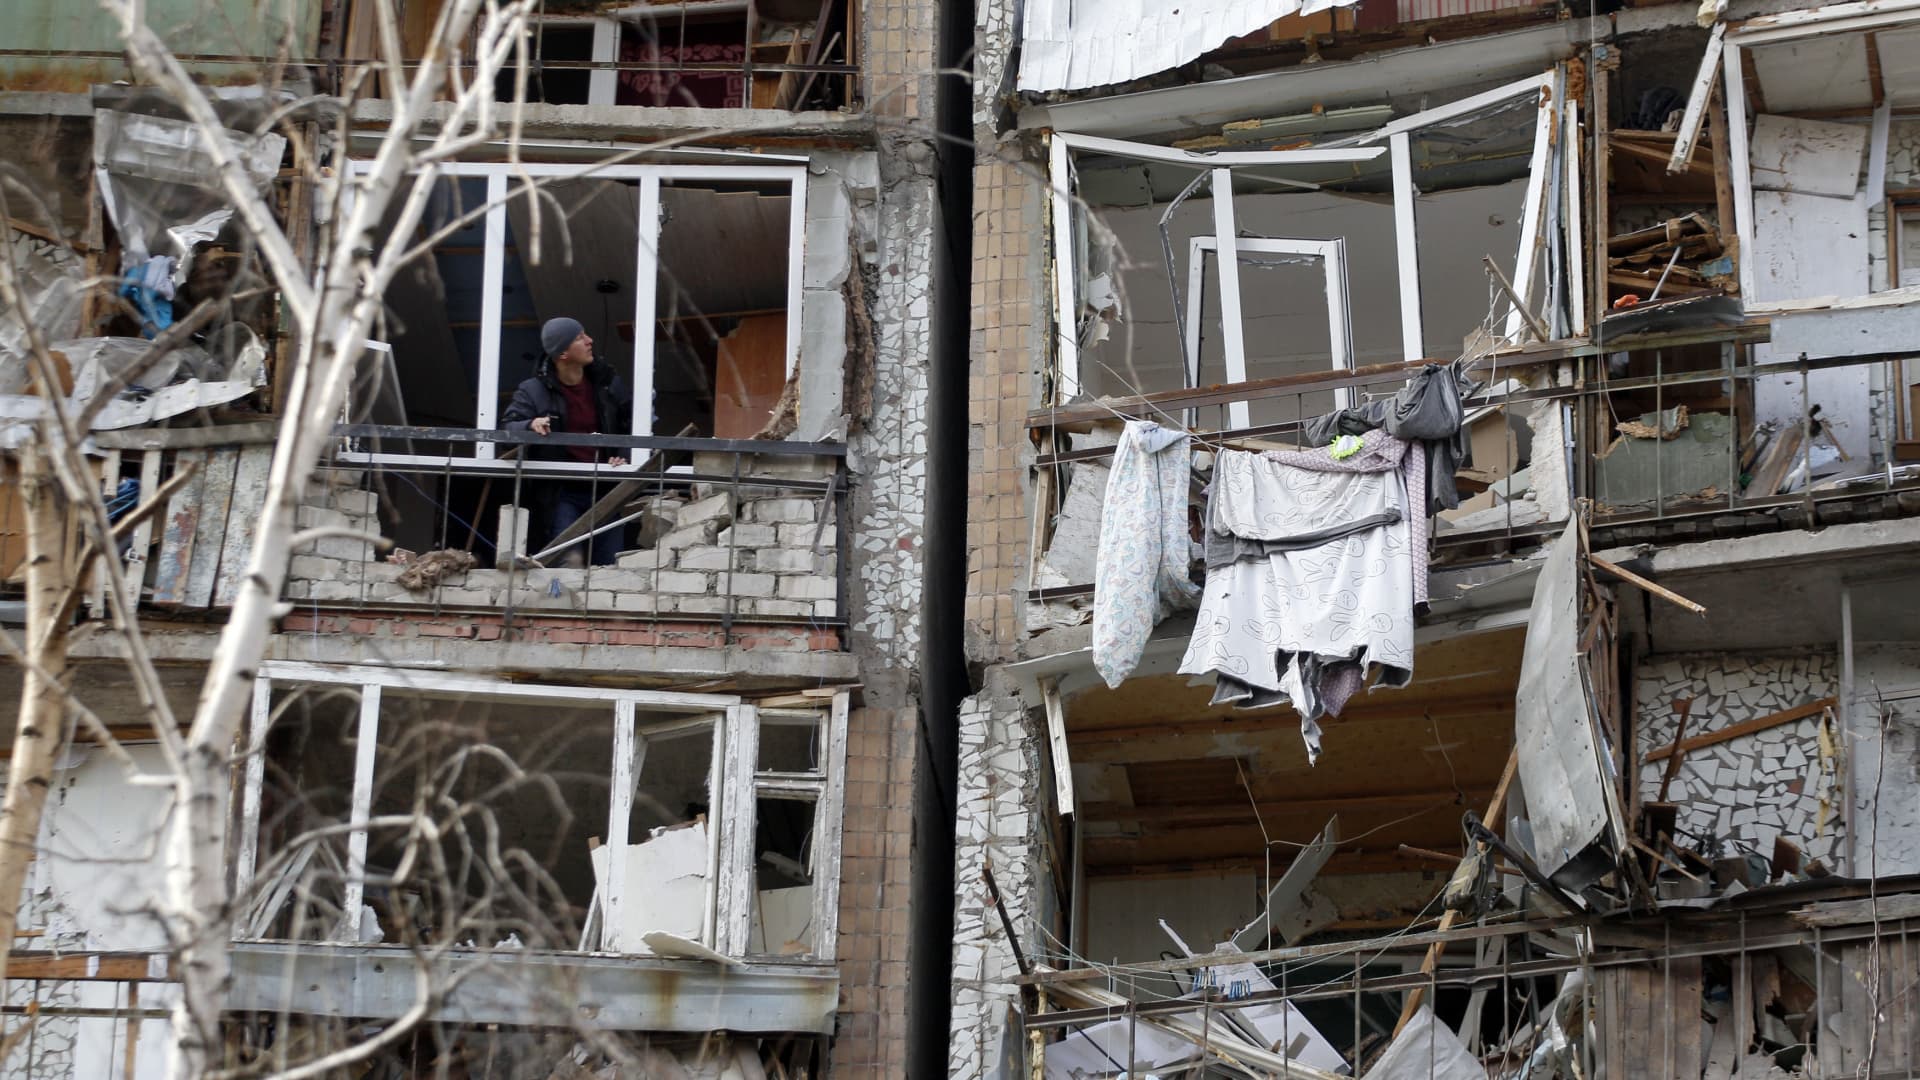 A resident looks out of the destroyed front of a room in a multi-storey building that was badly damaged as a result of Russian missile explosion after it was shot down over the city by Ukrainian air defence on March 6, in Kramatorsk on March 7, 2022.